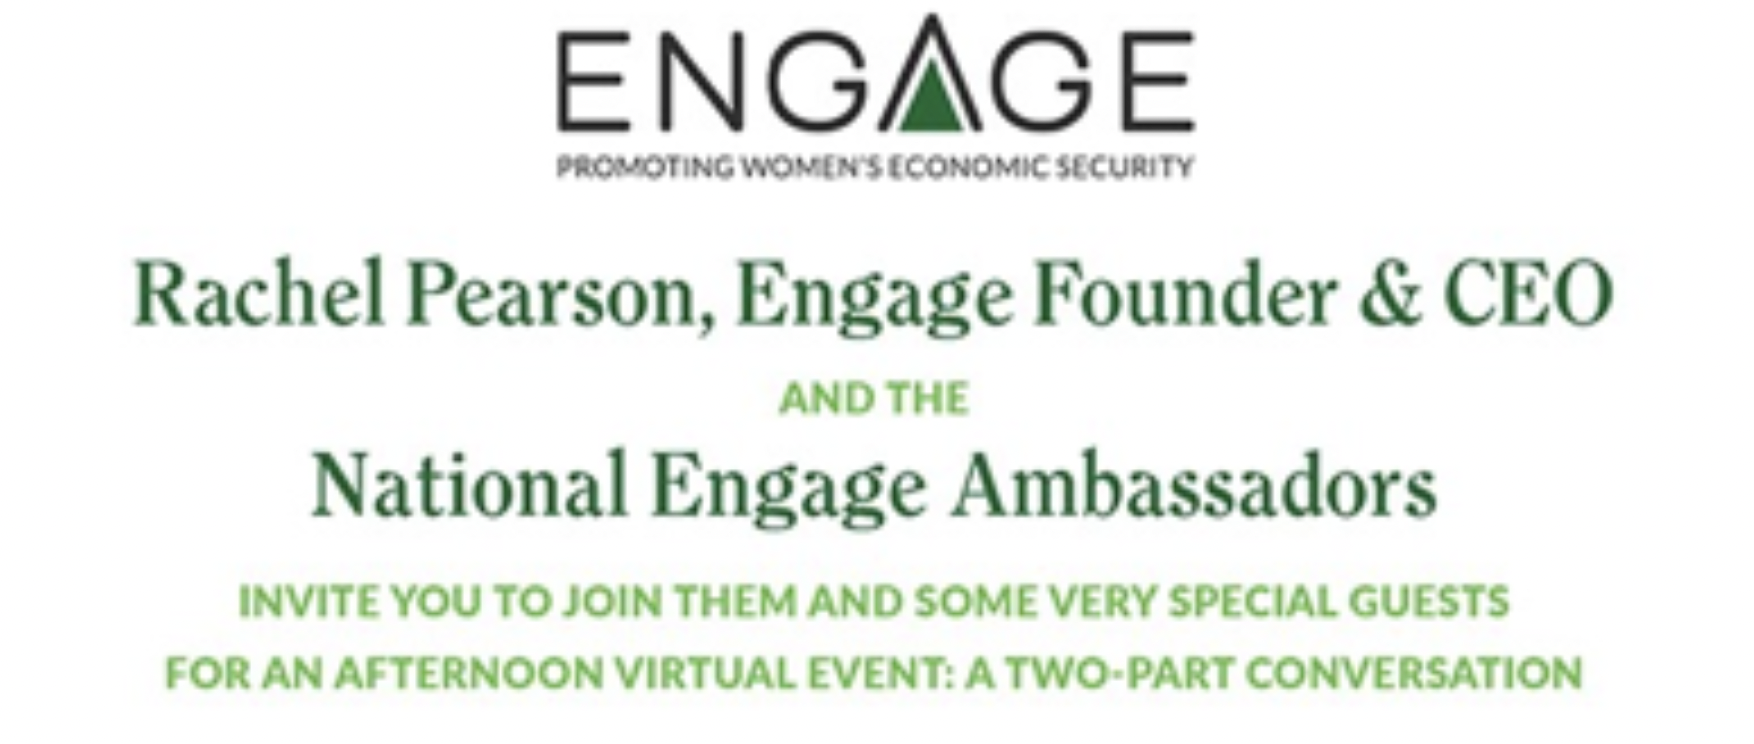 An Afternoon Virtual Event: A Two-Part Conversation